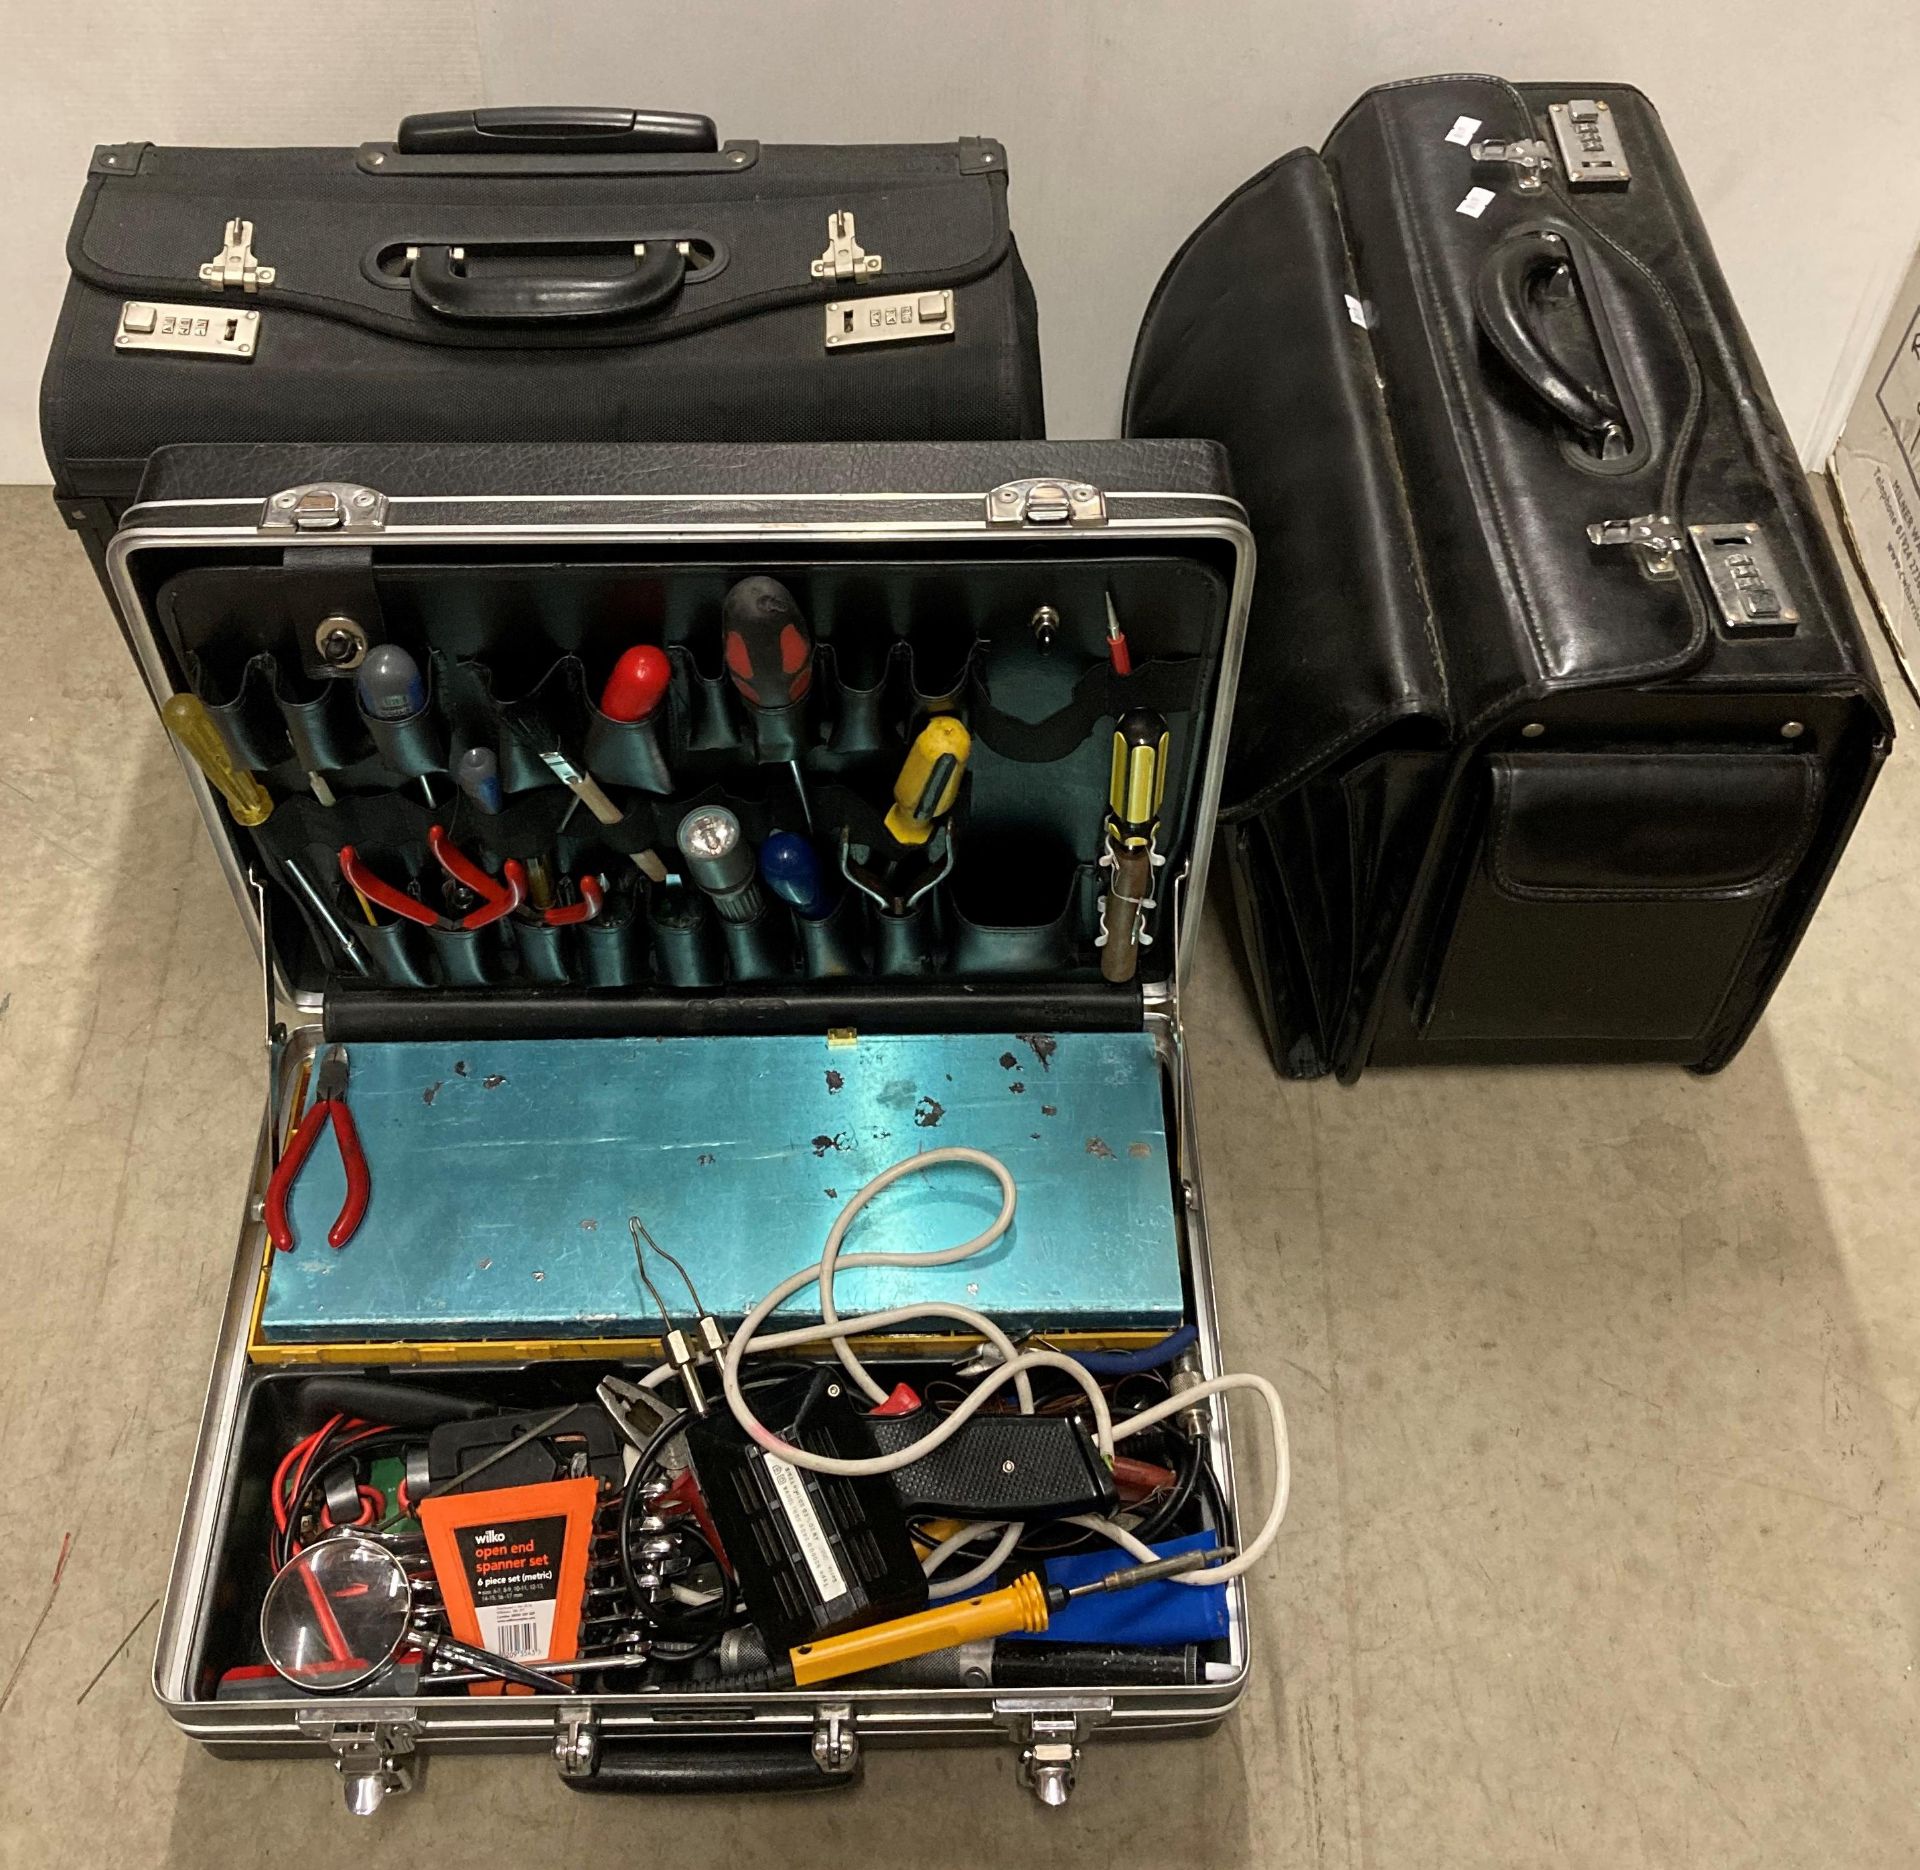 Boxer electrician engineers' case with assorted hand tools and two other black engineers' cases